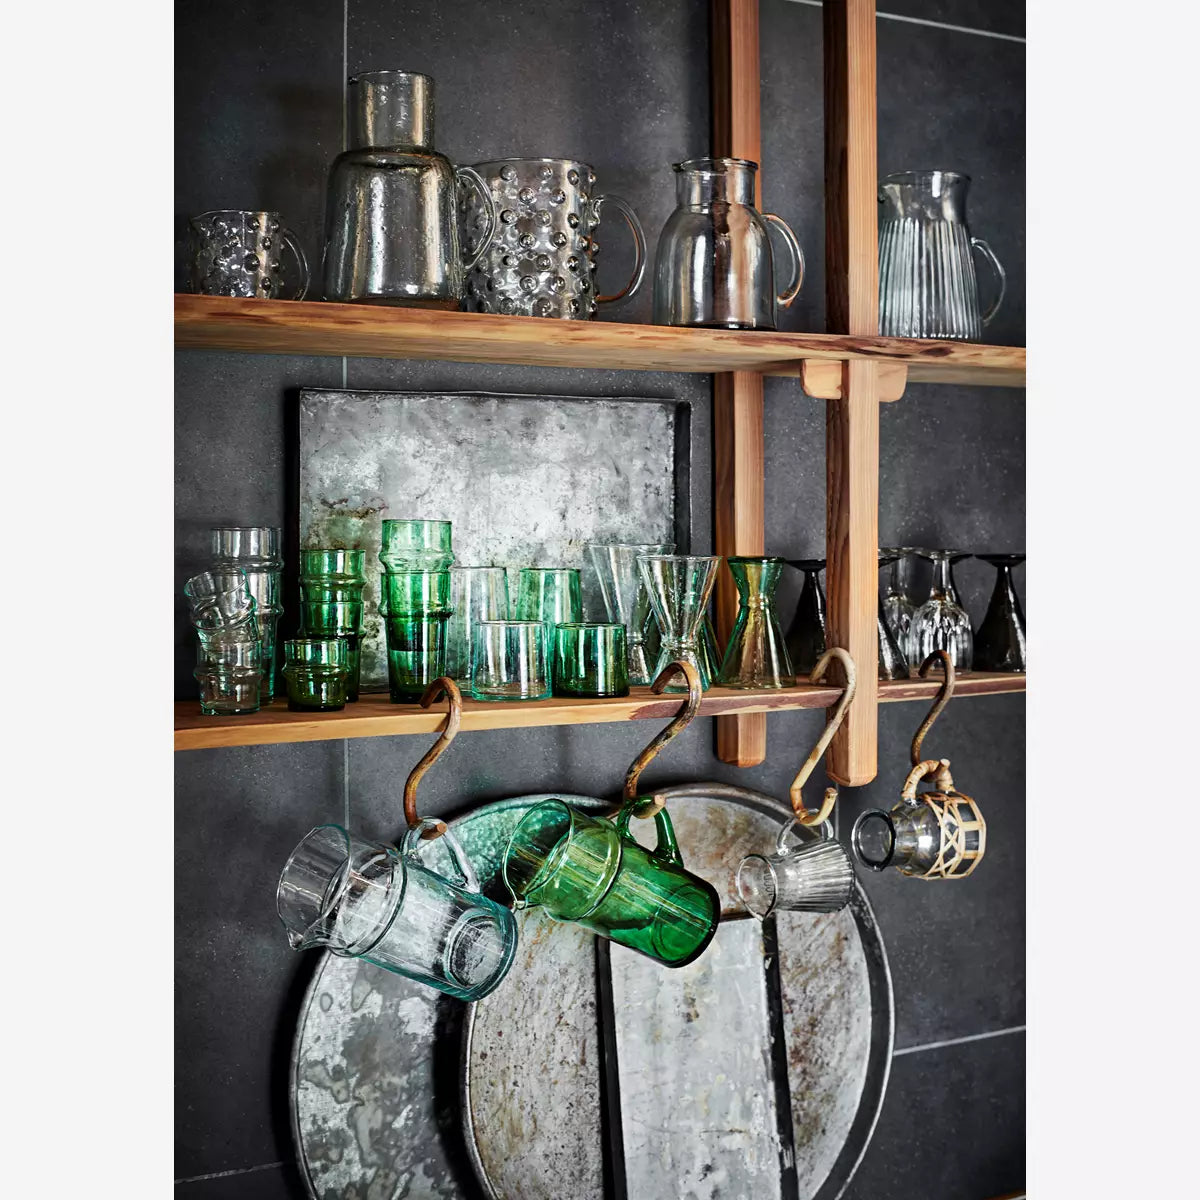 The Every Space 1 Litre Beldi Glass Jug with original Moroccan Beldi glass by Madam Stoltz